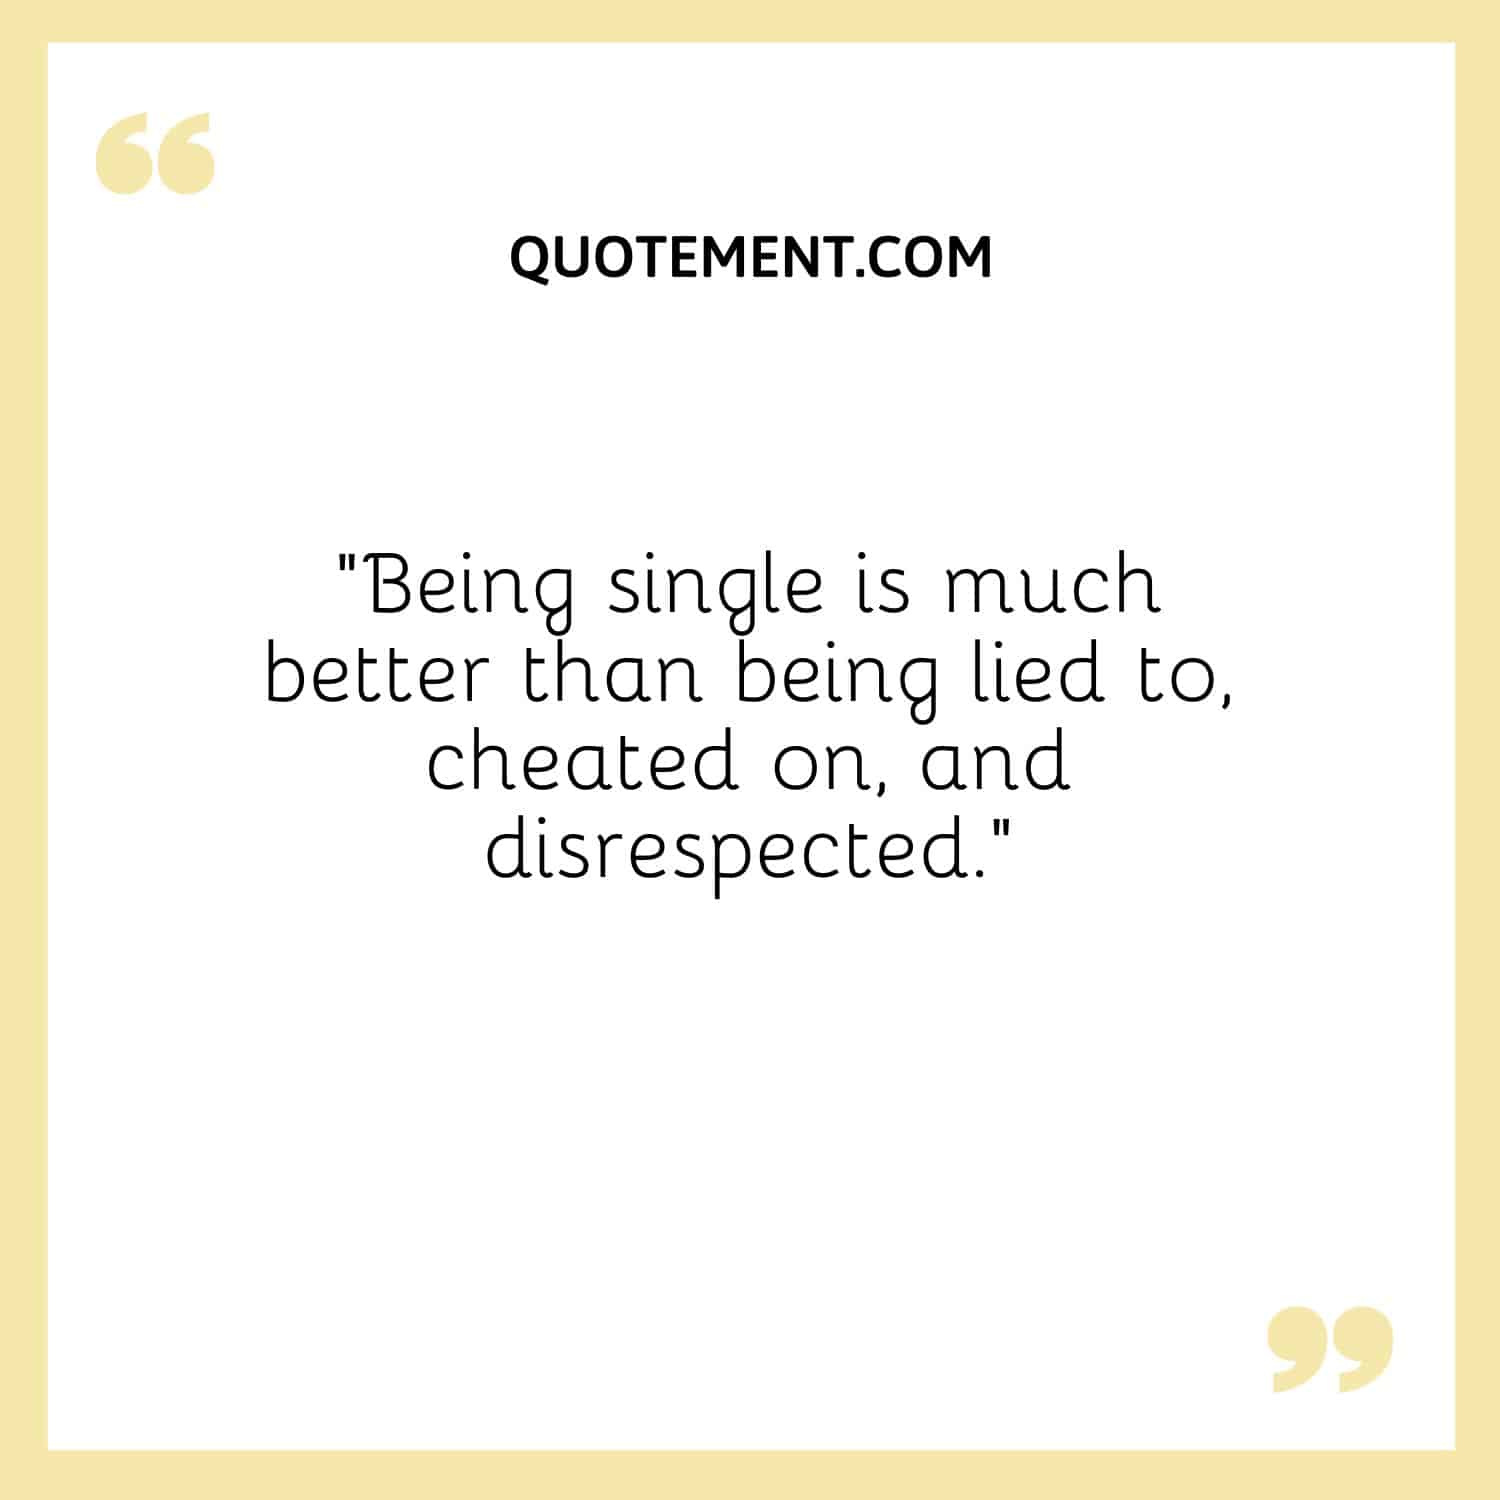 Being single is much better than being lied to, cheated on, and disrespected